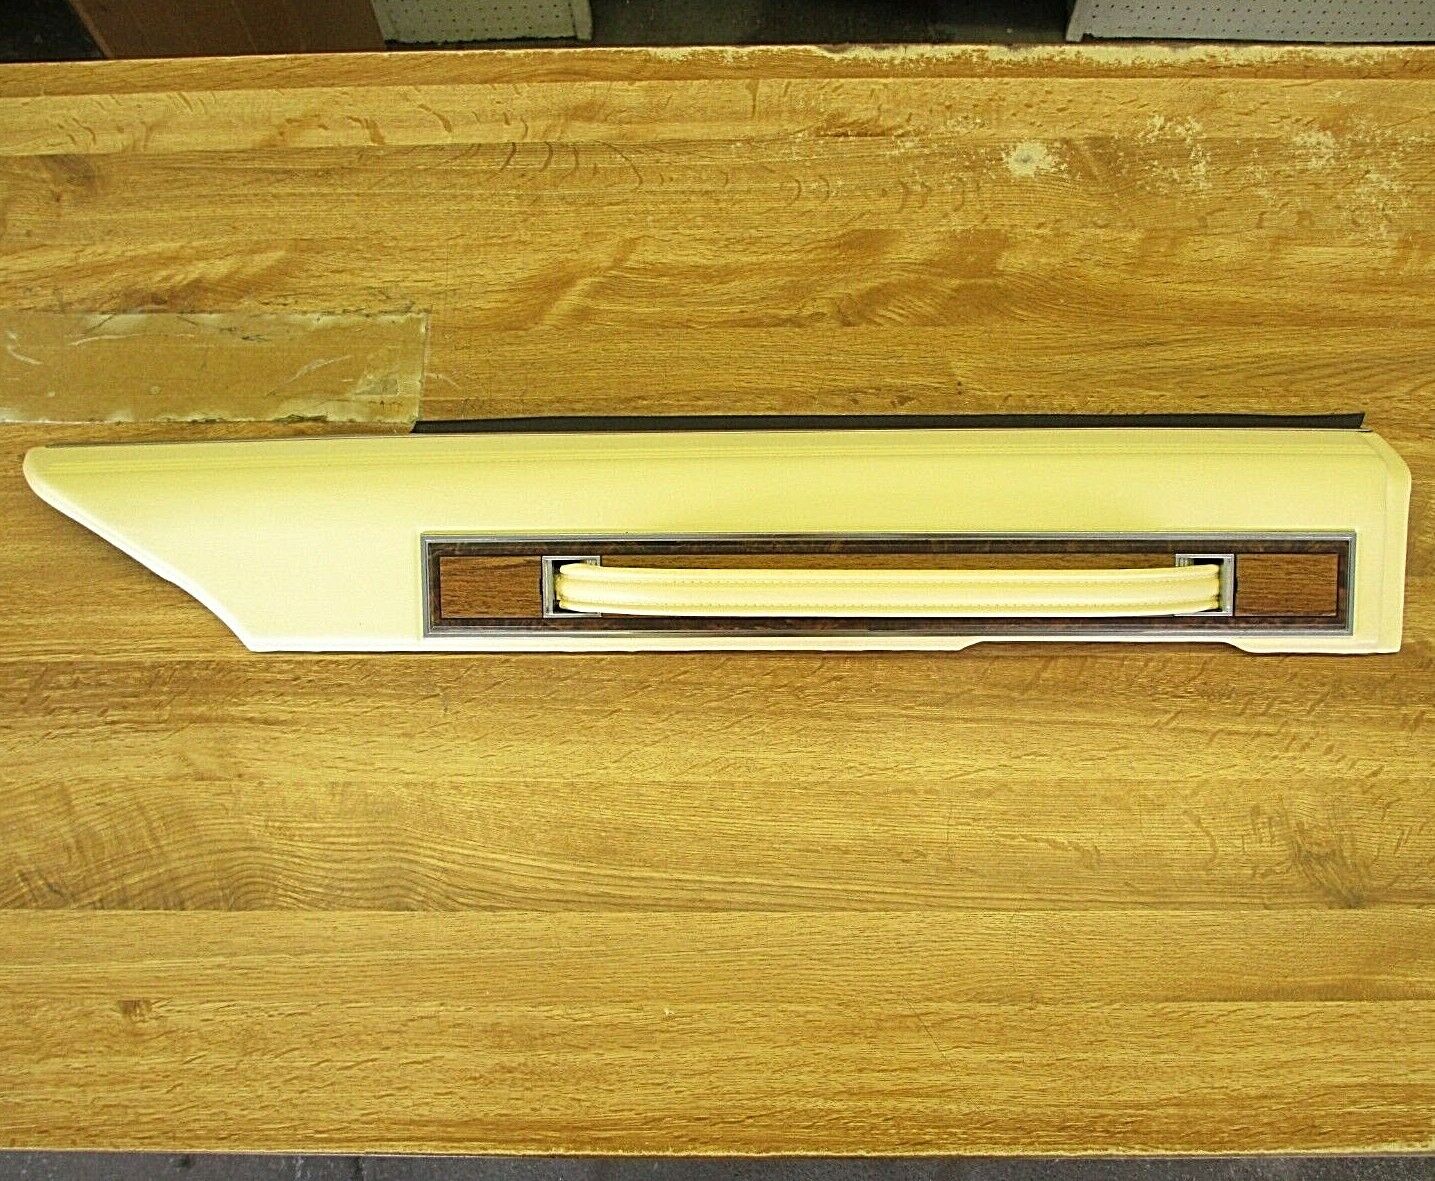 1980-1985 CADILLAC SEVILLE LEFT REAR DOOR PULL HANDLE / TRIM ASSEMBLY YELLOW